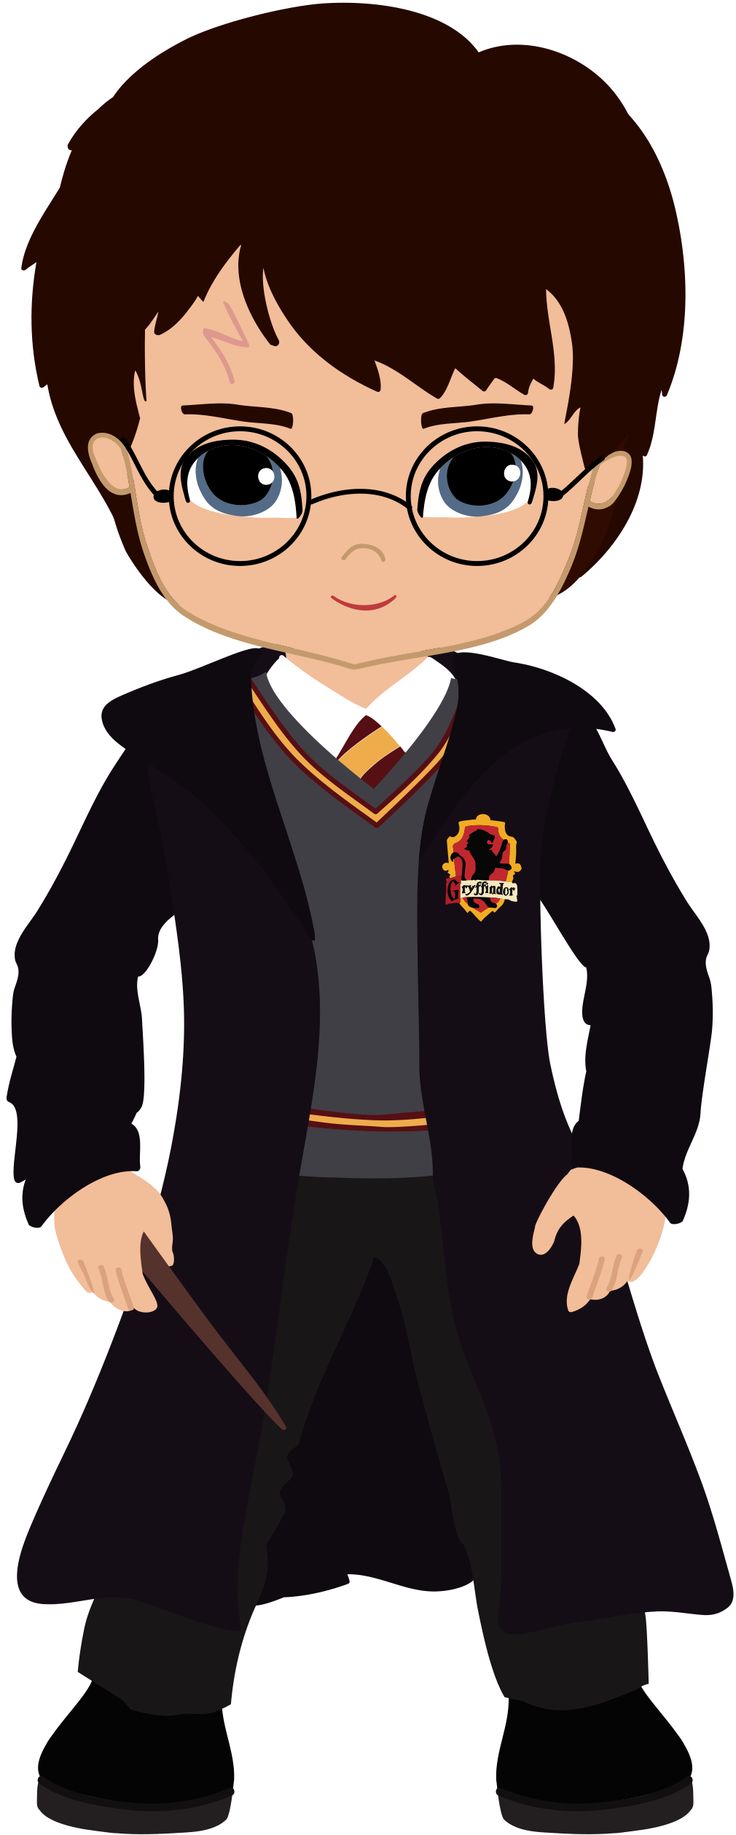 Free Harry Potter Clip Art Pictures.